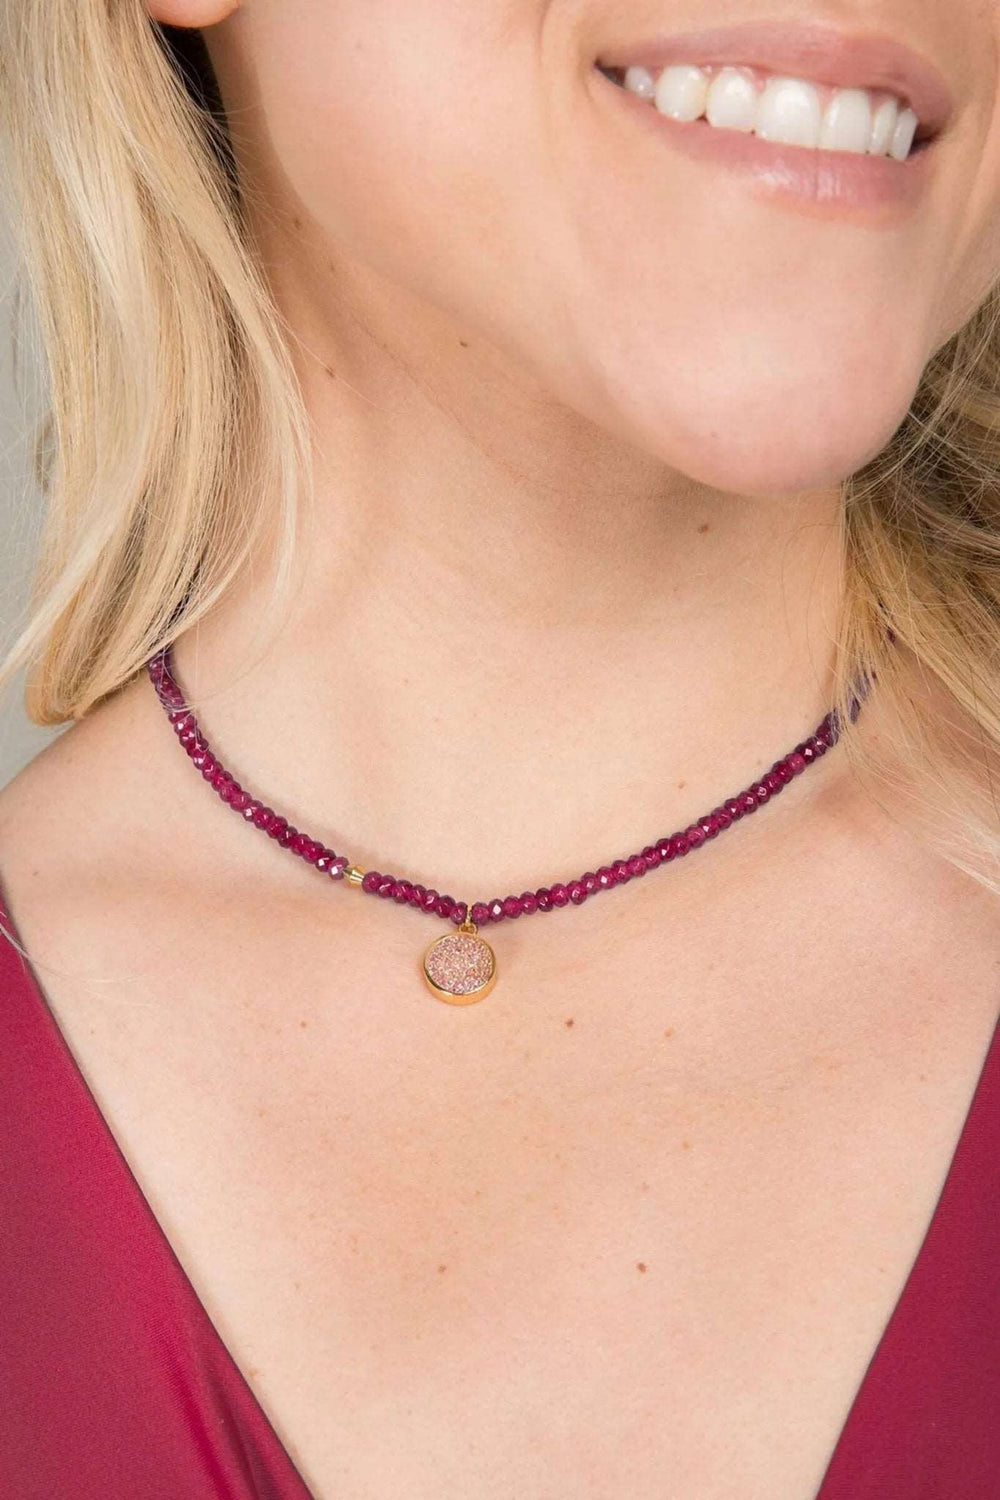 Agate Gemstone Beads Necklace with Druzy Pendant Dark Red